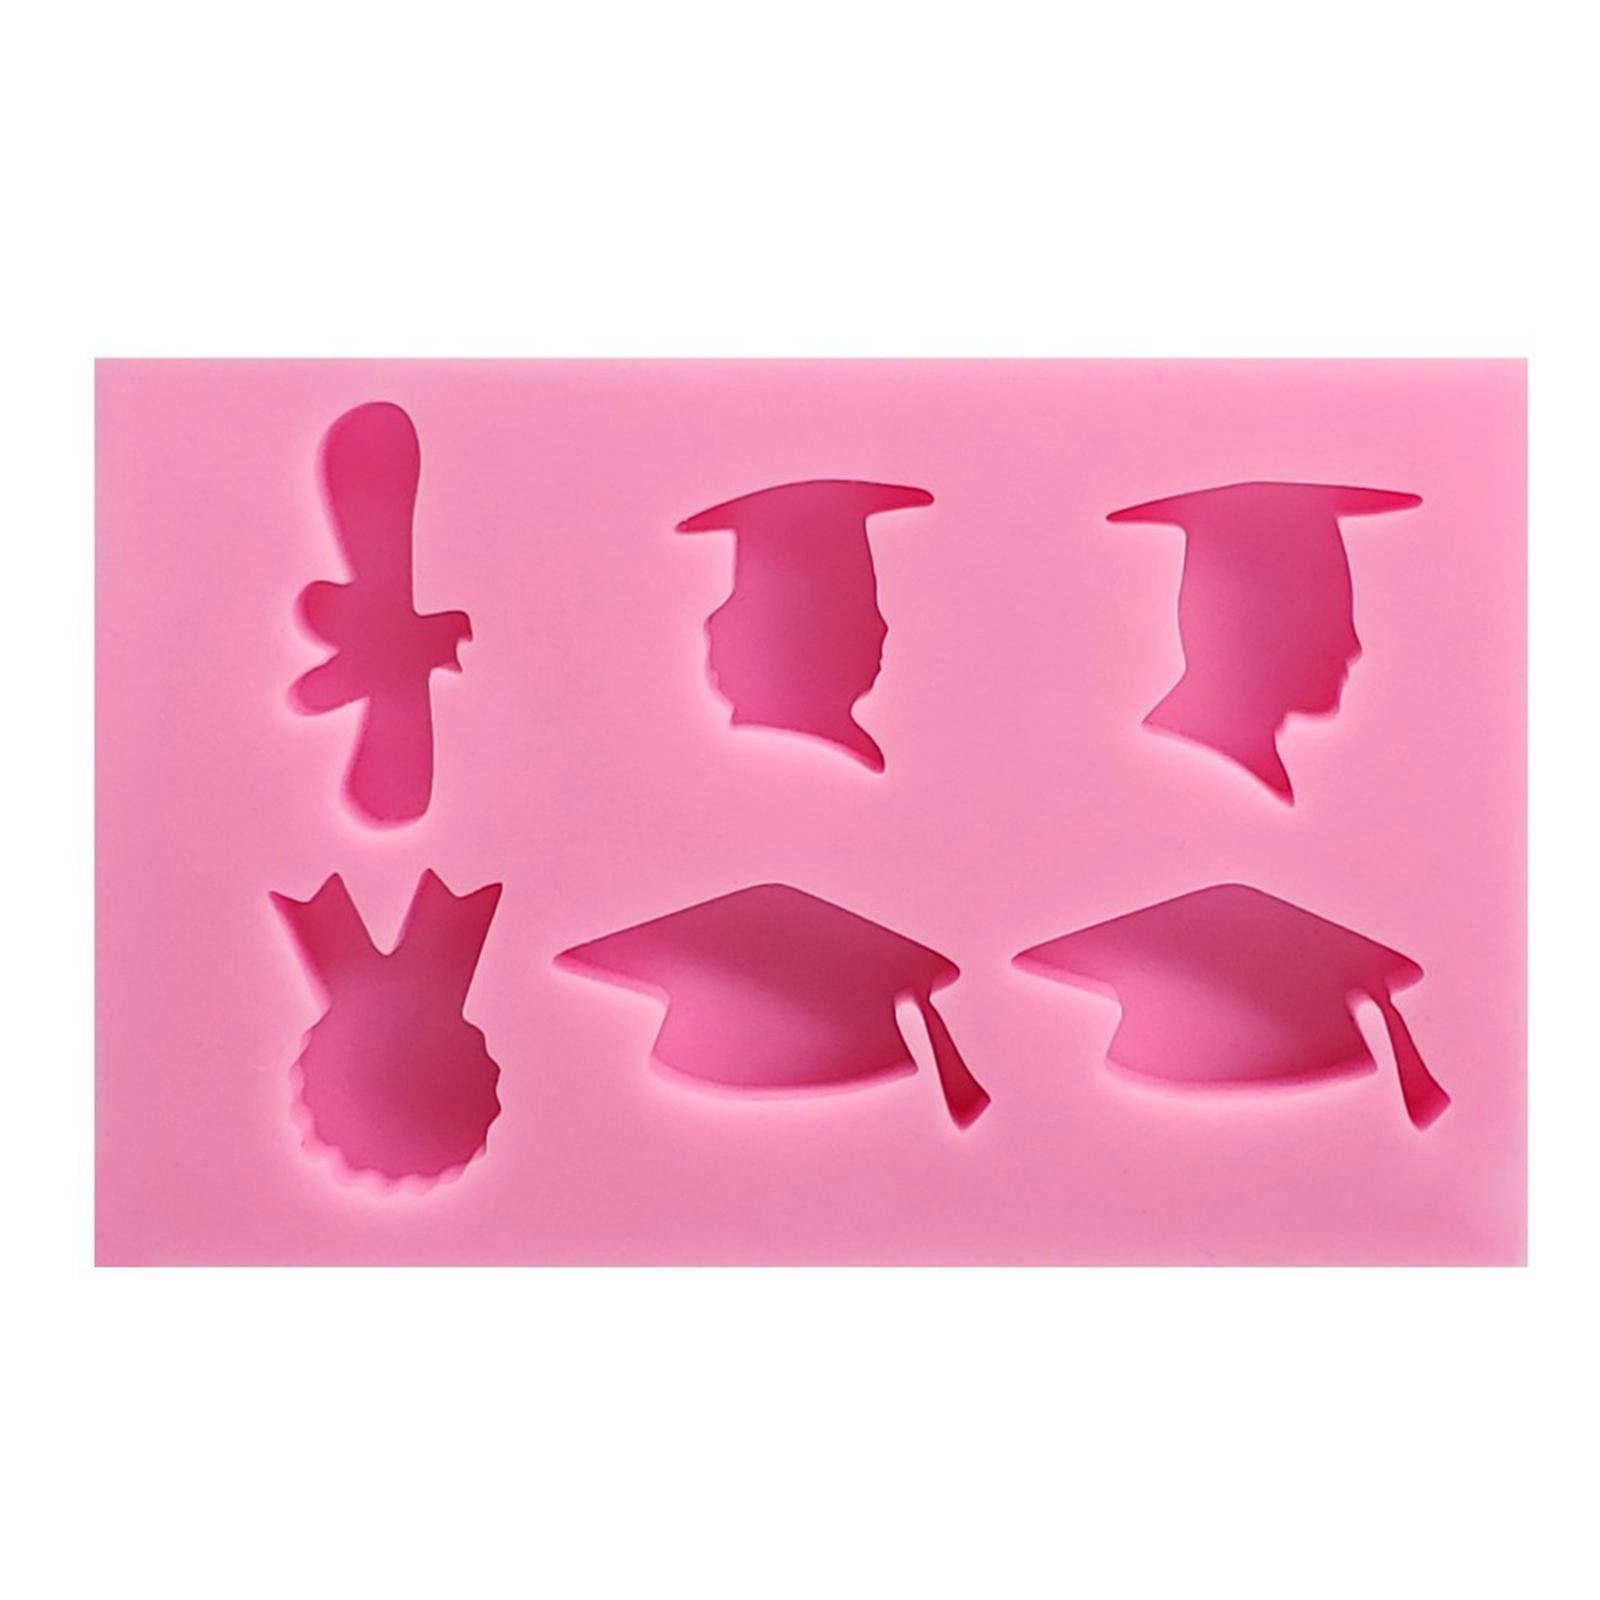 Bachelor Mold Tray Graduation Ceremony Party Gift Decor Graduation Season Silicone Mold with Hat Certification Diploma and Paper Shape for Chocolate Cake Topper Decoration Pink pink 